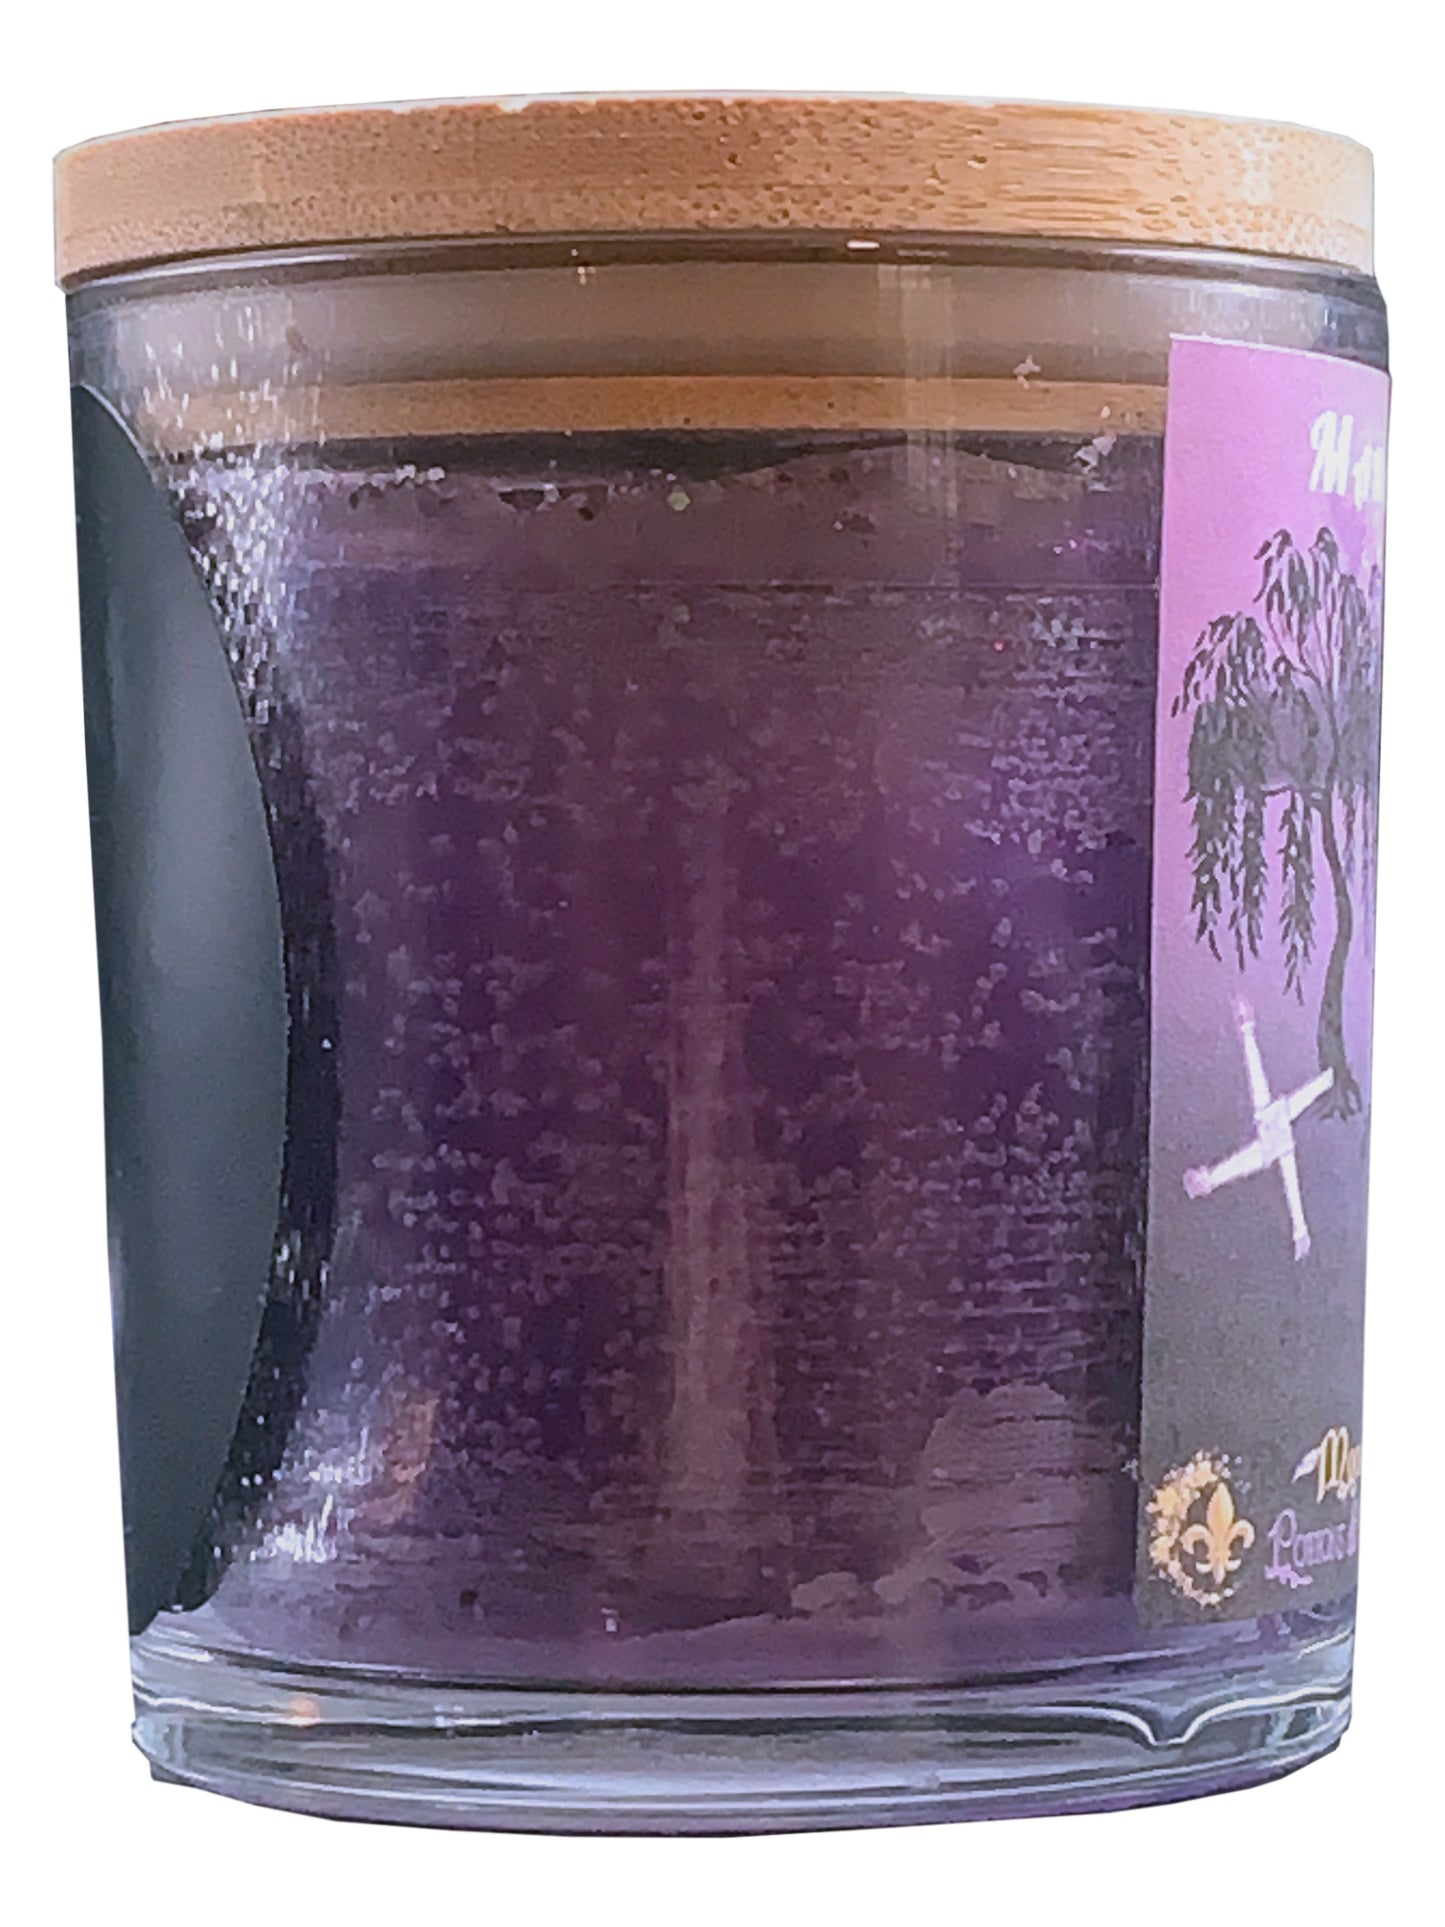 Maman Brigitte Prayer Candle, Right - Moonlight Potions & Charms